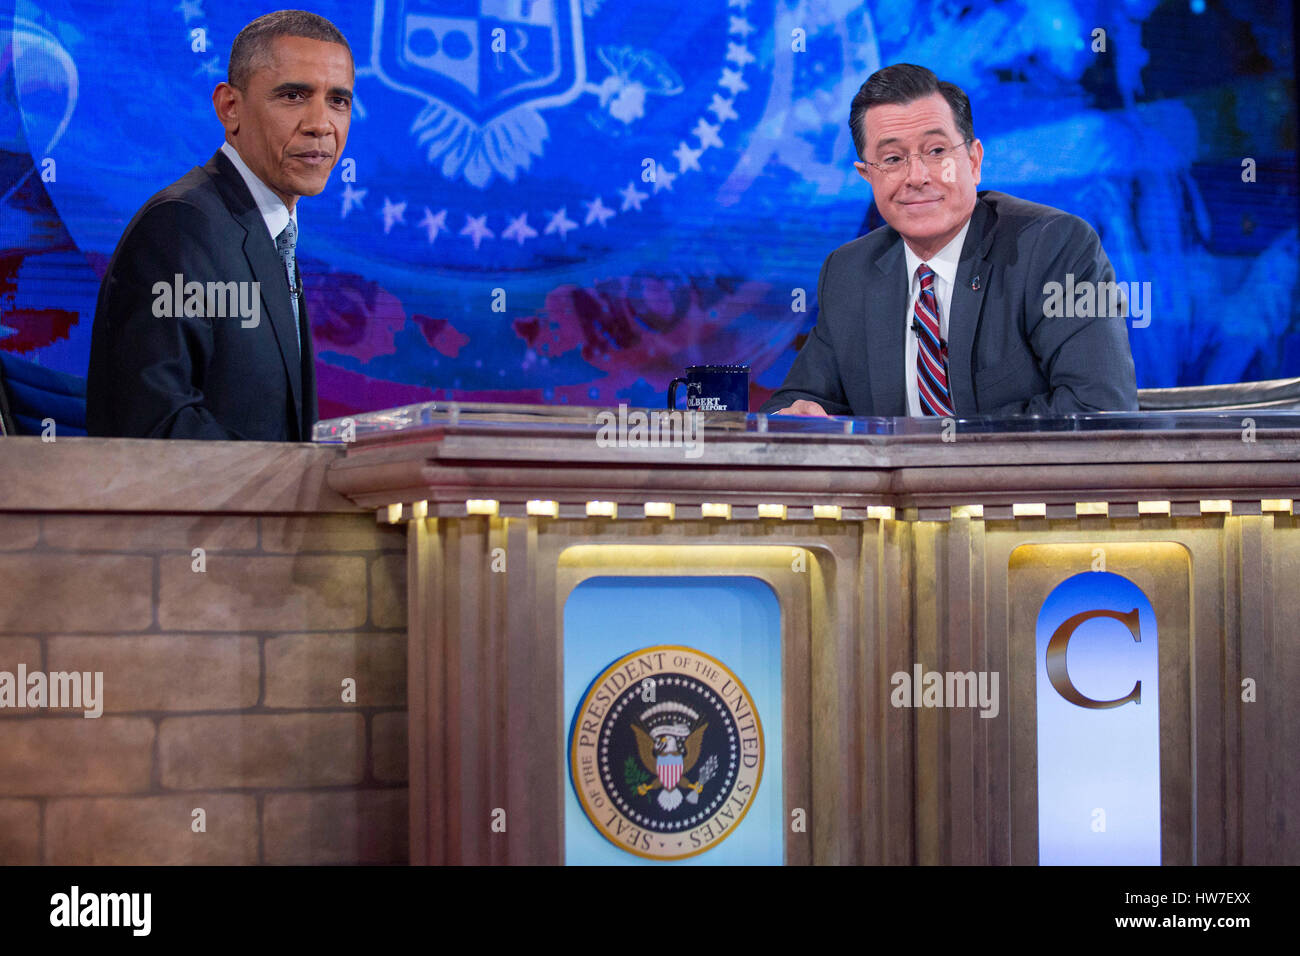 United States President Barack Obama left tapes Comedy Central's 'The Colbert Report' with television personality Stephen Colbert in Lisner Auditorium on the campus of George Washington University in Washington D.C. U.S. on Monday December 8 2014. This is Stock Photo